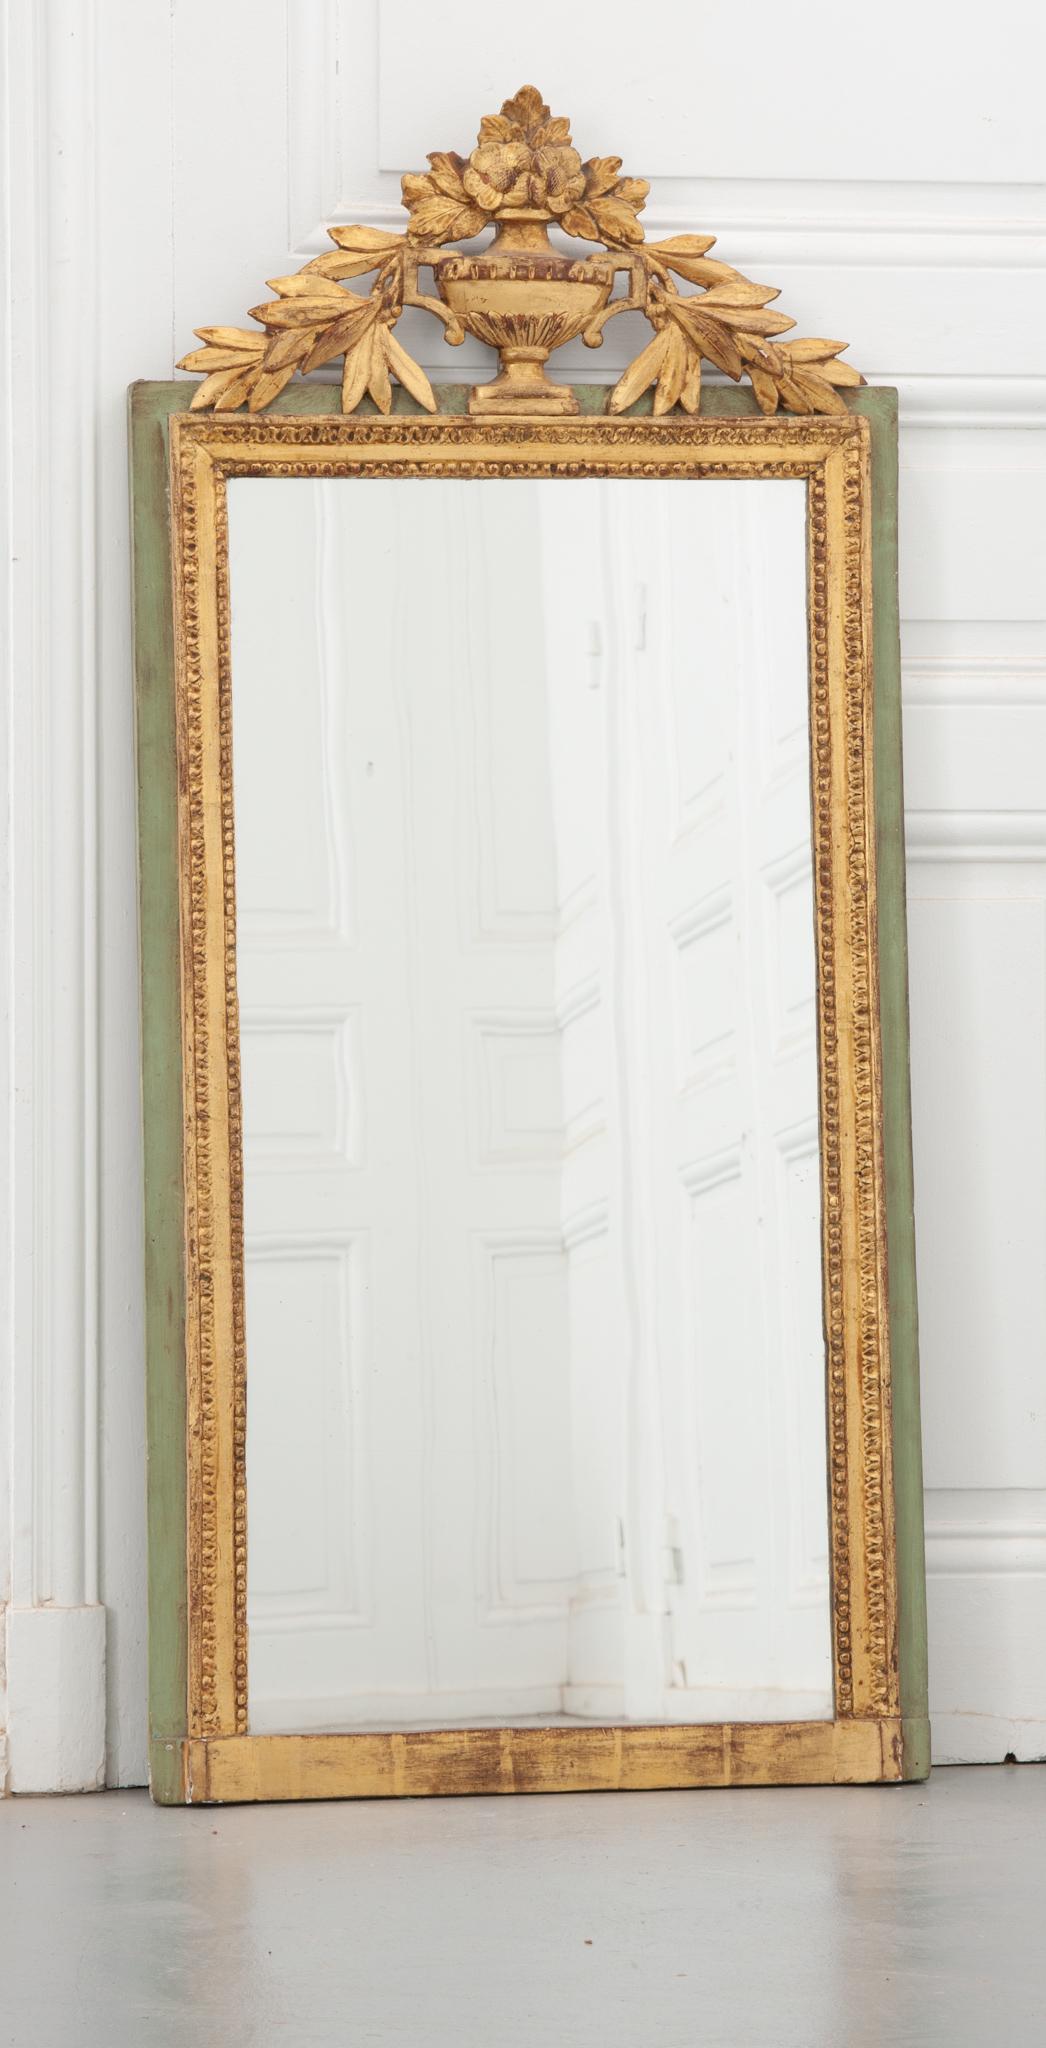 A lovely petite 19th century French mirror, made in the style of Louis XVI. Circa 1840, the worn gold gilt and sage green paint have gained a wonderful patina. A beautiful pierced carving of an urn overflowing with flowers and laurel sits atop the